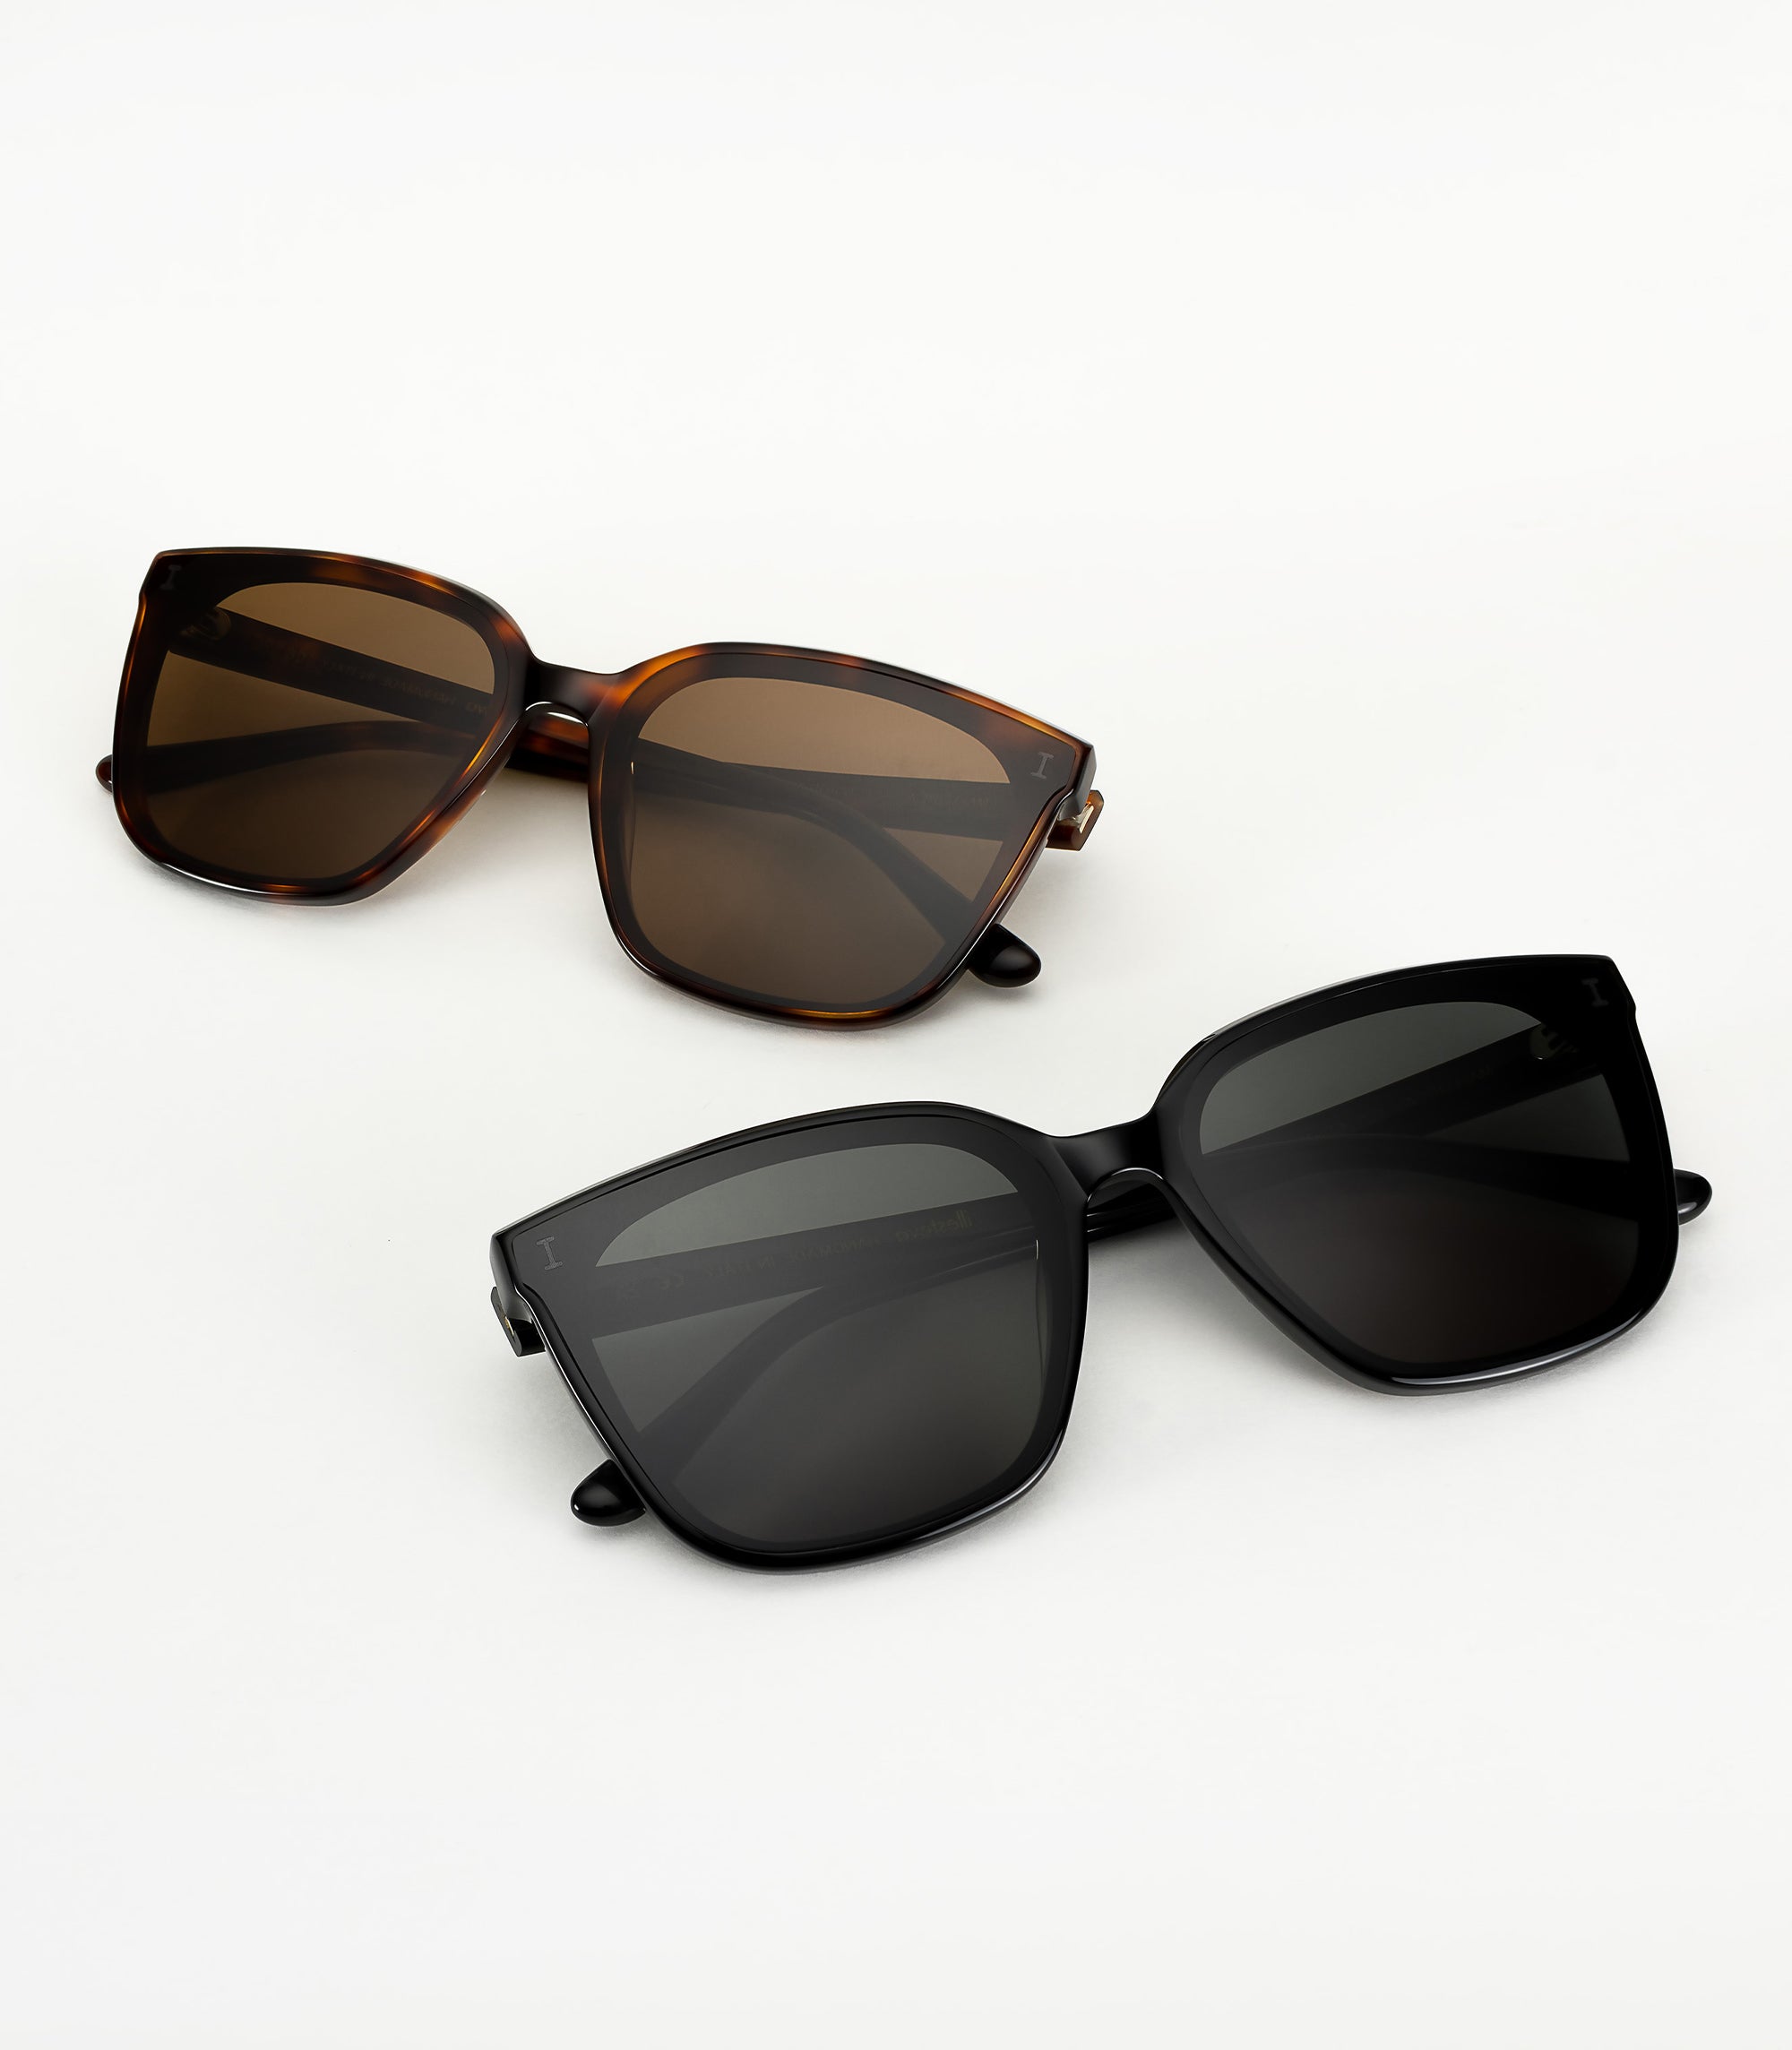 Mallorca Sunglasses in Black and Havana displayed on a white background